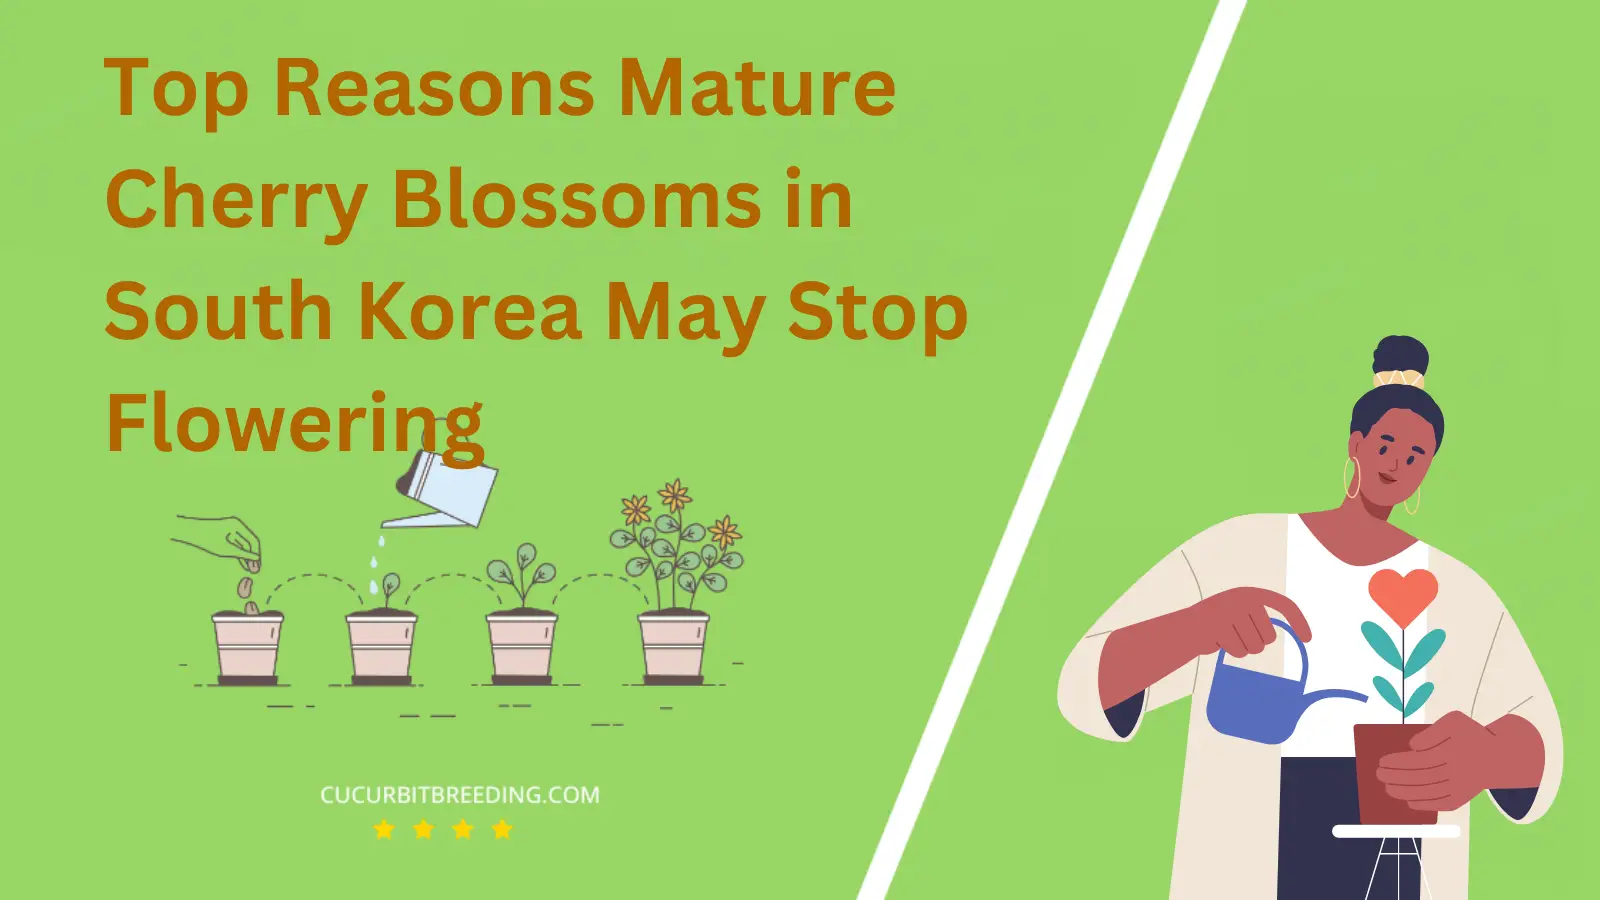 Top Reasons Mature Cherry Blossoms in South Korea May Stop Flowering